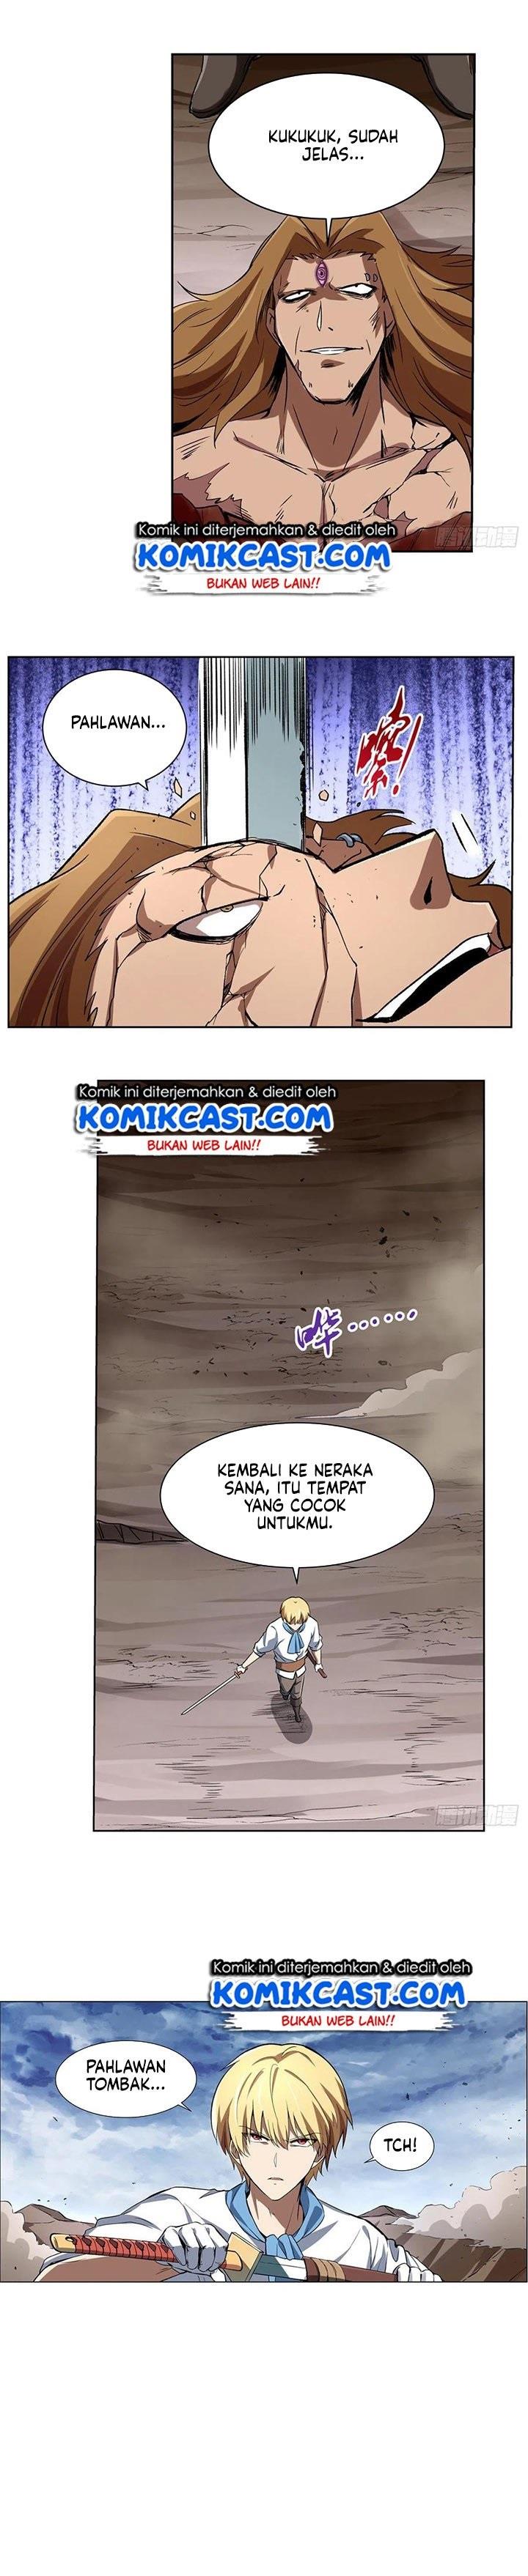 The Demon King Who Lost His Job Chapter 144